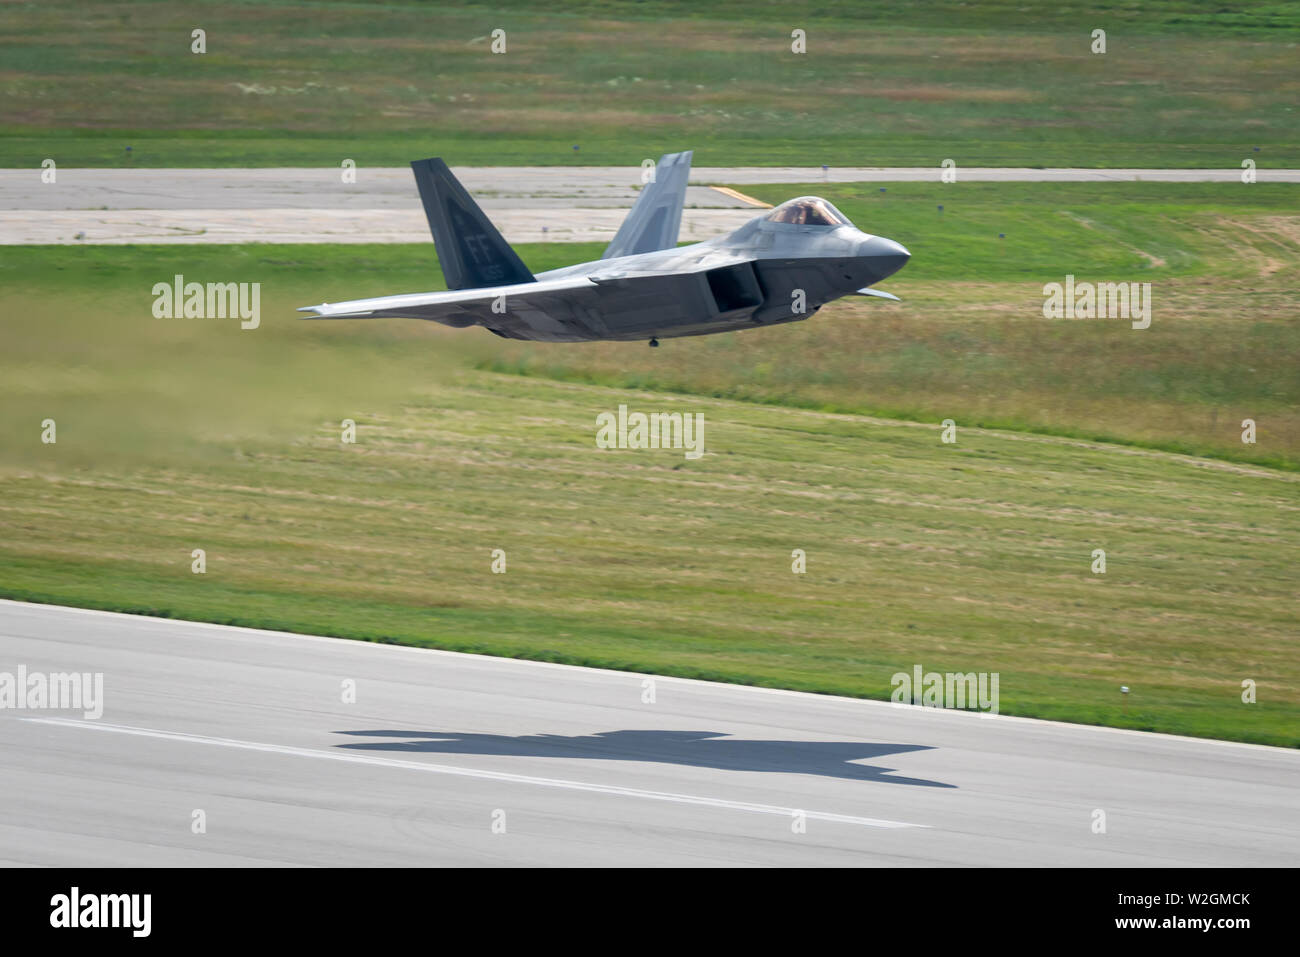 U.S. Air Force Maj. Paul Lopez, F-22 Demo Team commander, takes off in Battle Creek, Mich. for the Field of Flight air show July 7, 2019. Representing the U.S. Air Force and Air Combat Command, the F-22 Demo Team travels to 25 air shows a season to showcase the performance and capabilities of the world's premier 5th-generation fighter. (U.S. Air Force photo by 2nd Lt. Samuel Eckholm) Stock Photo